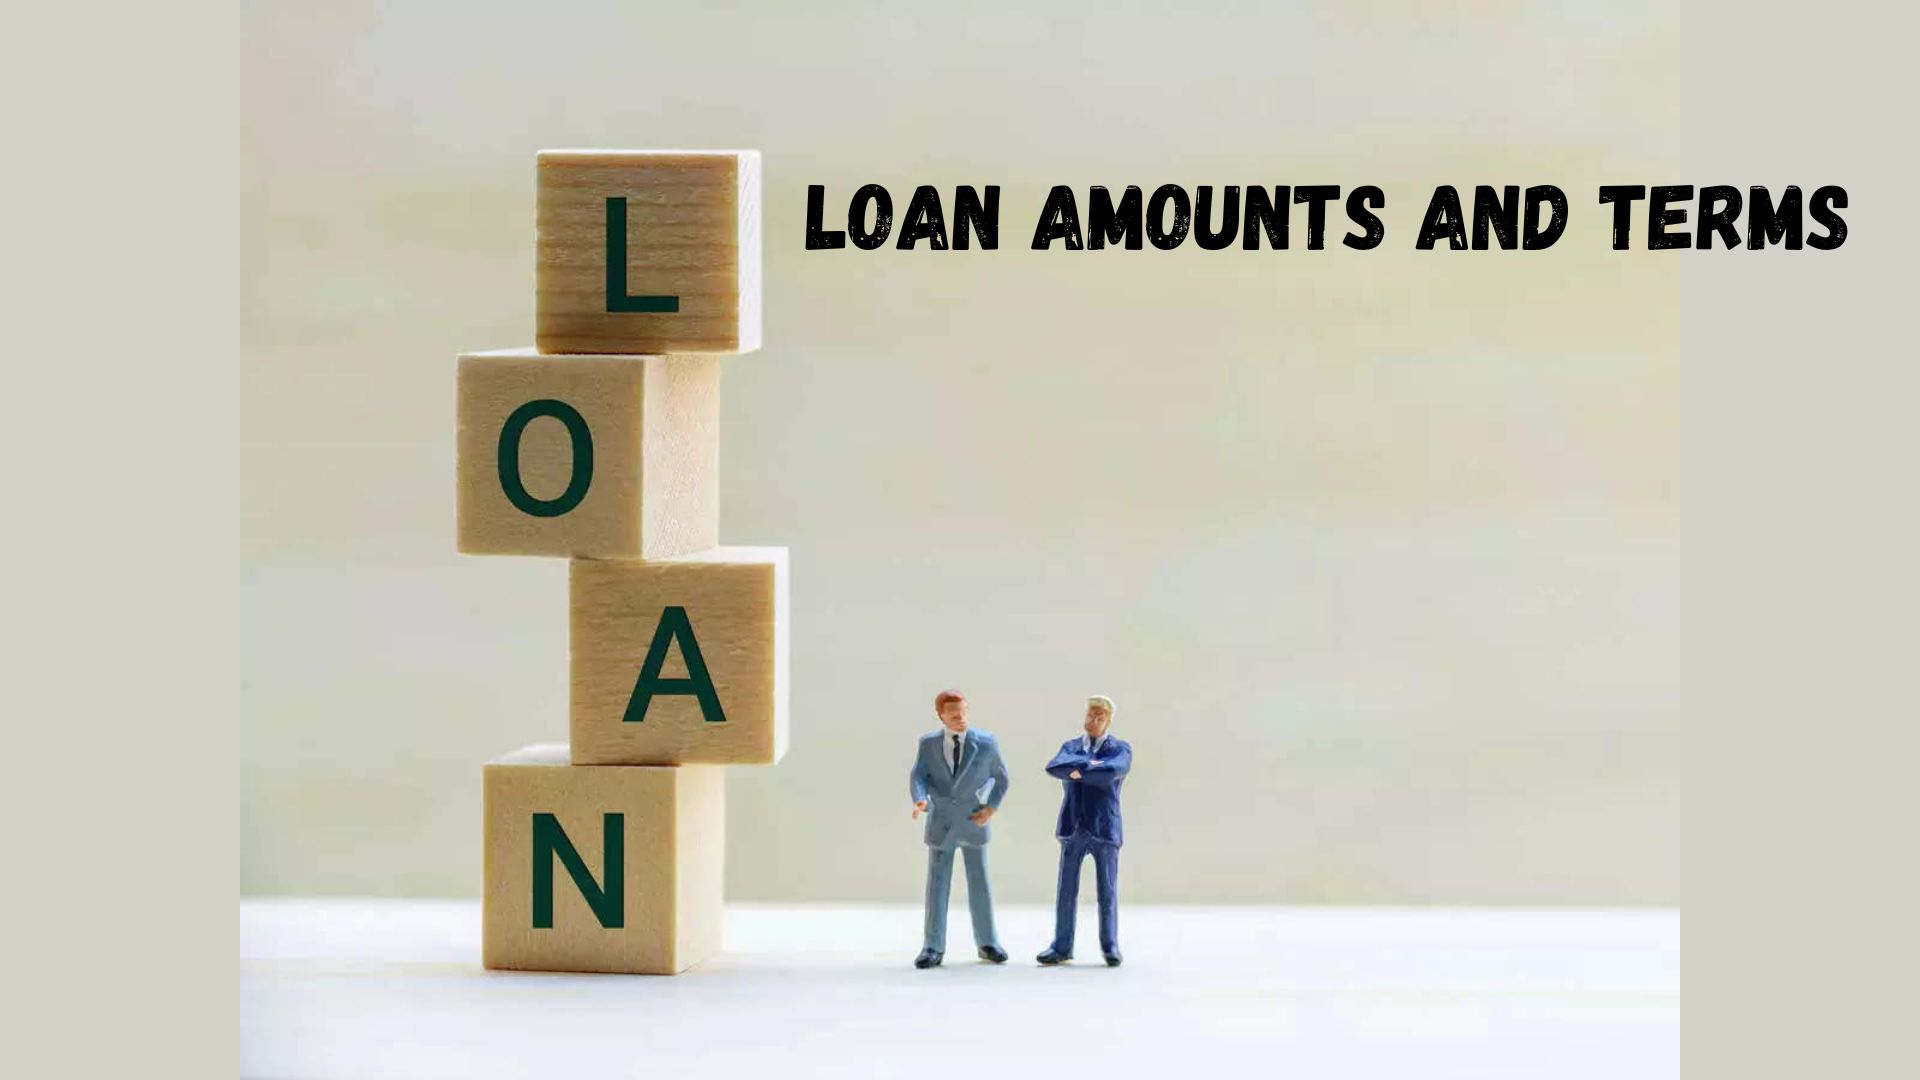 Loan Amounts and Terms.